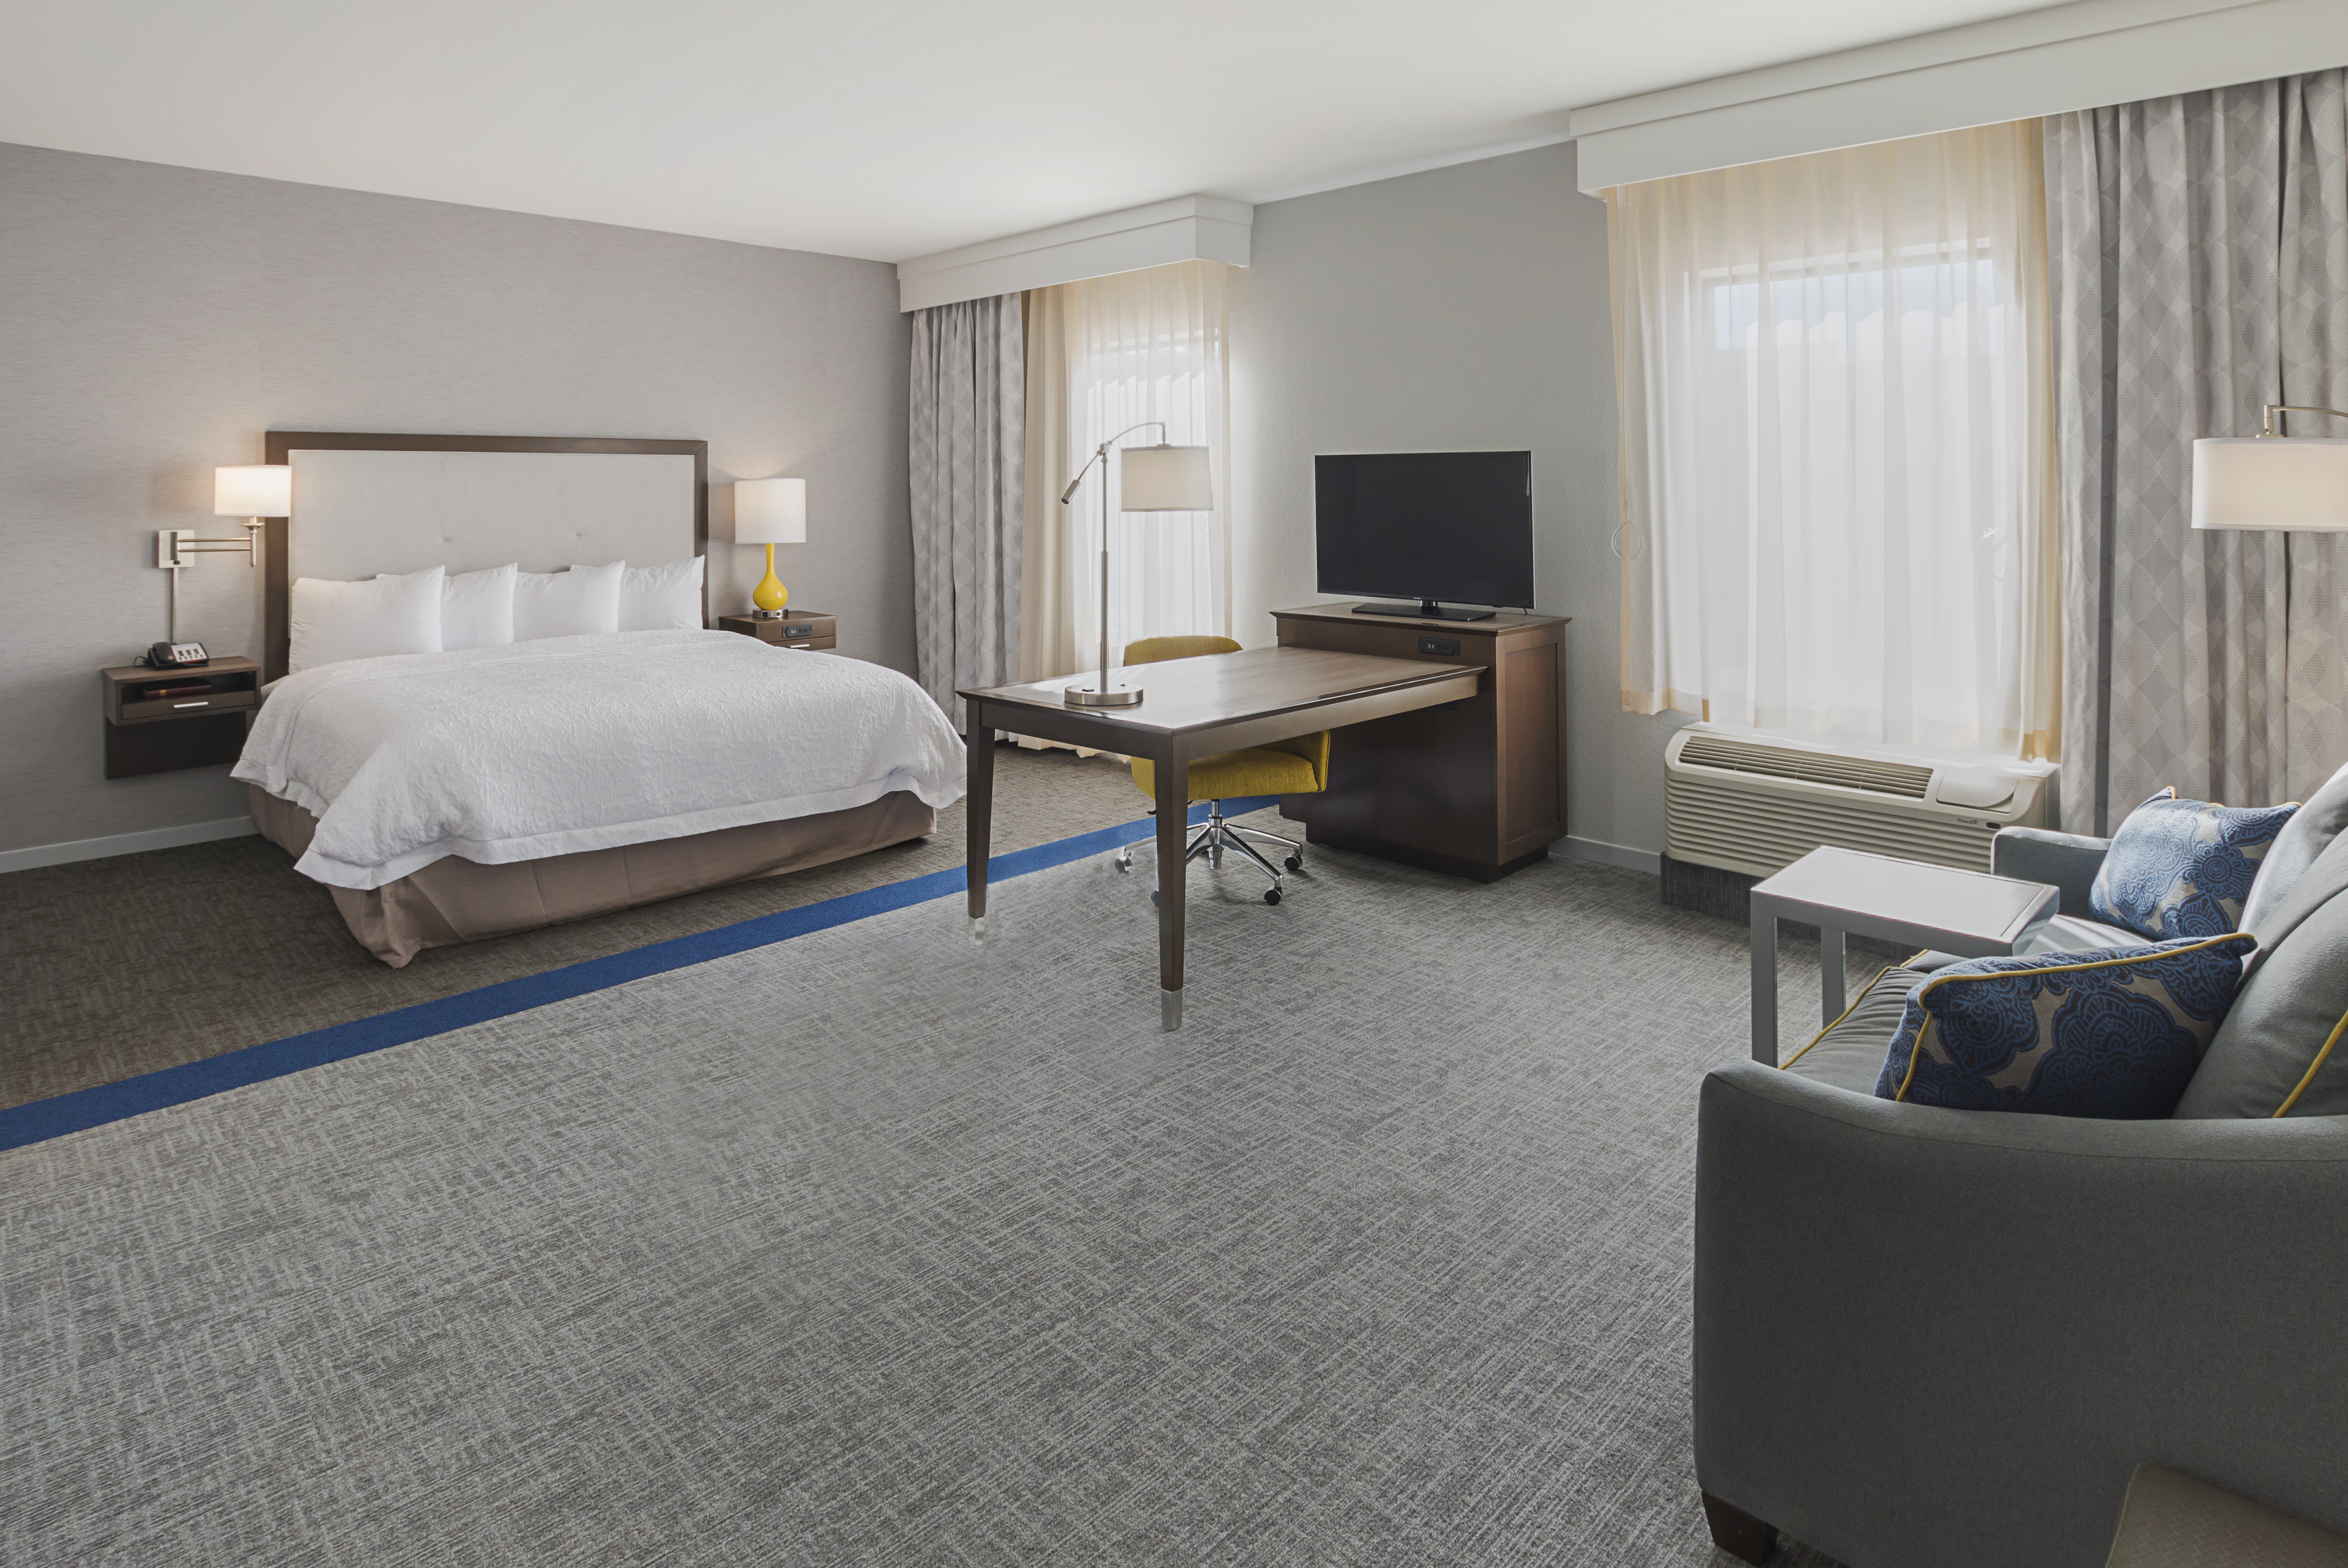 Hampton Inn studio room with king bed,
  desk, desk chair, sofa bed, and seating area